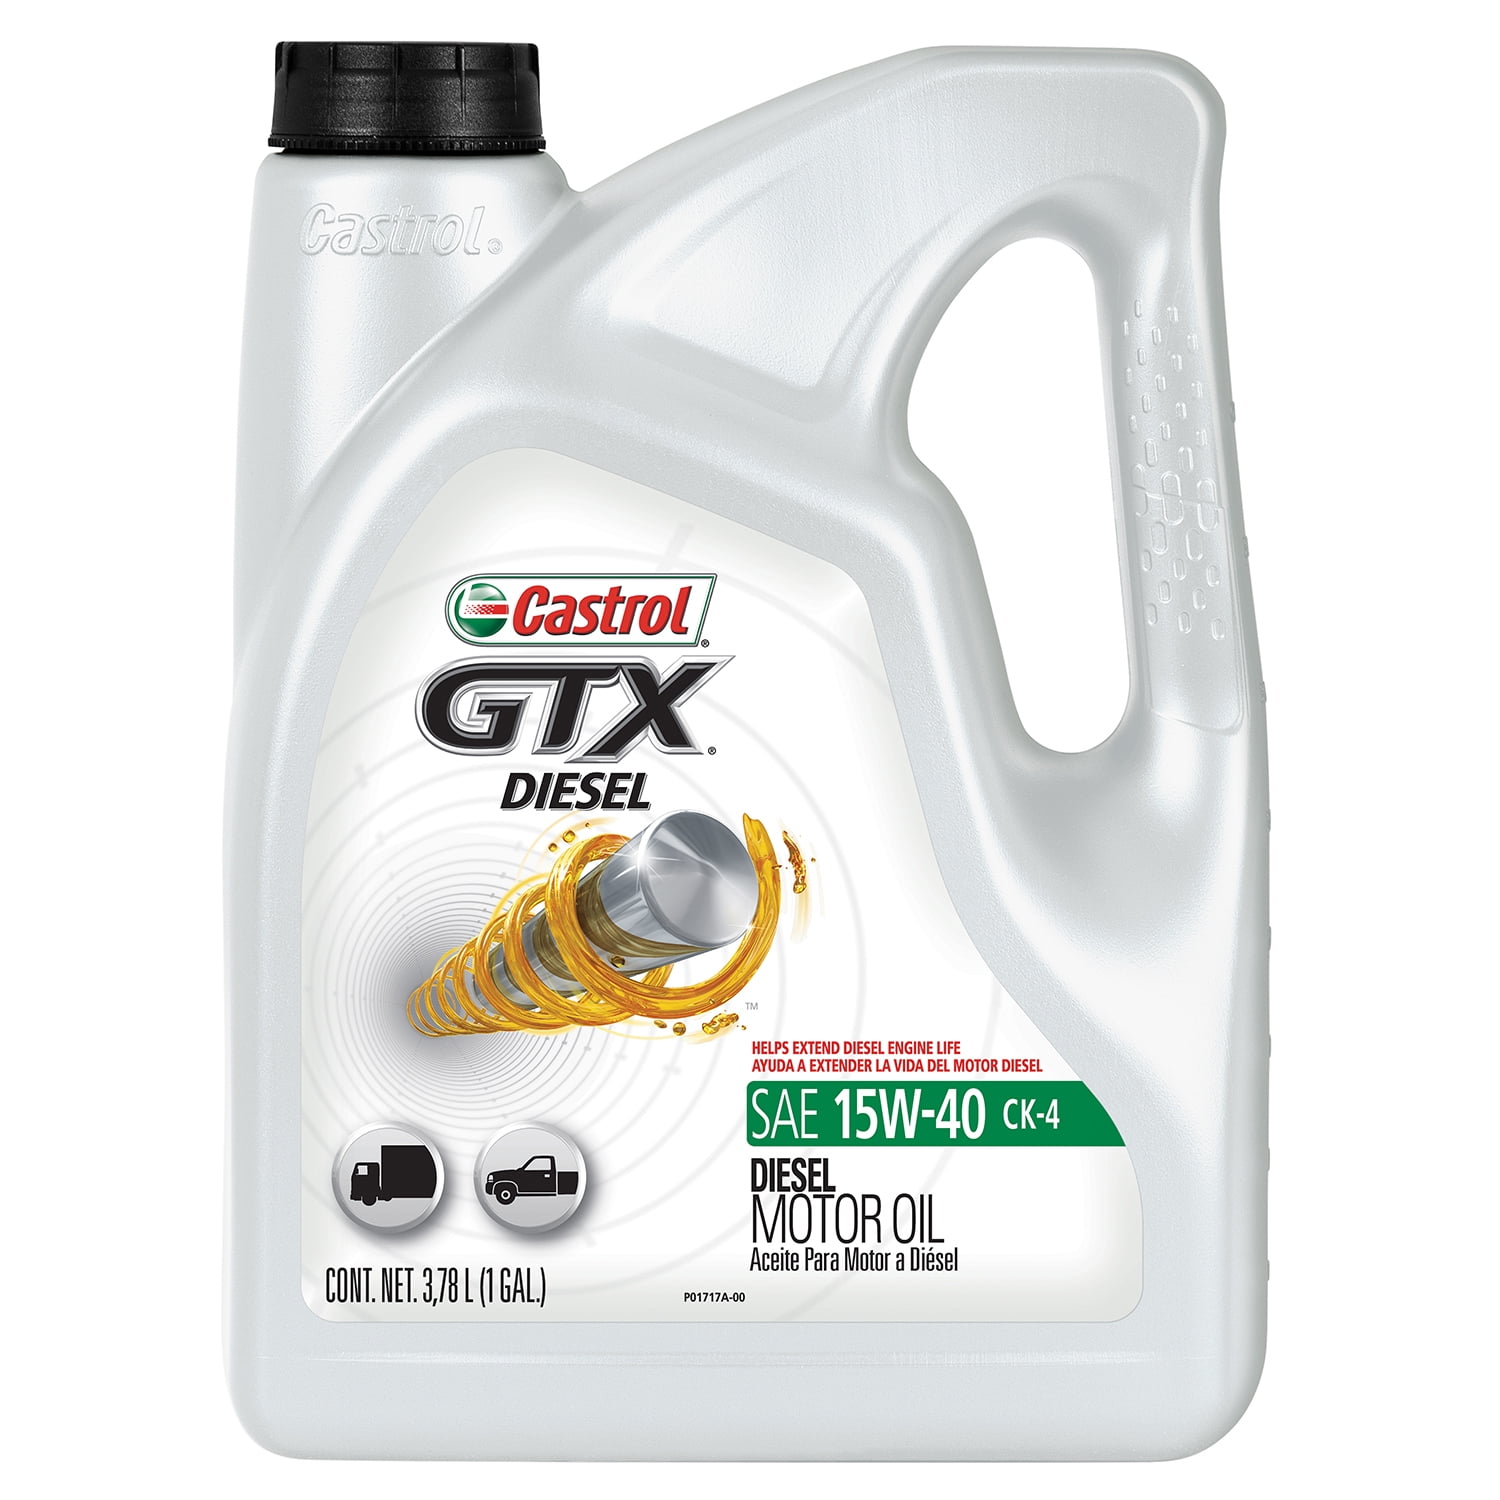 Buy Castrol Gtx Ck 4 Conventional Diesel Motor Oil 15w 40 1 Gallon Online At Lowest Price In 